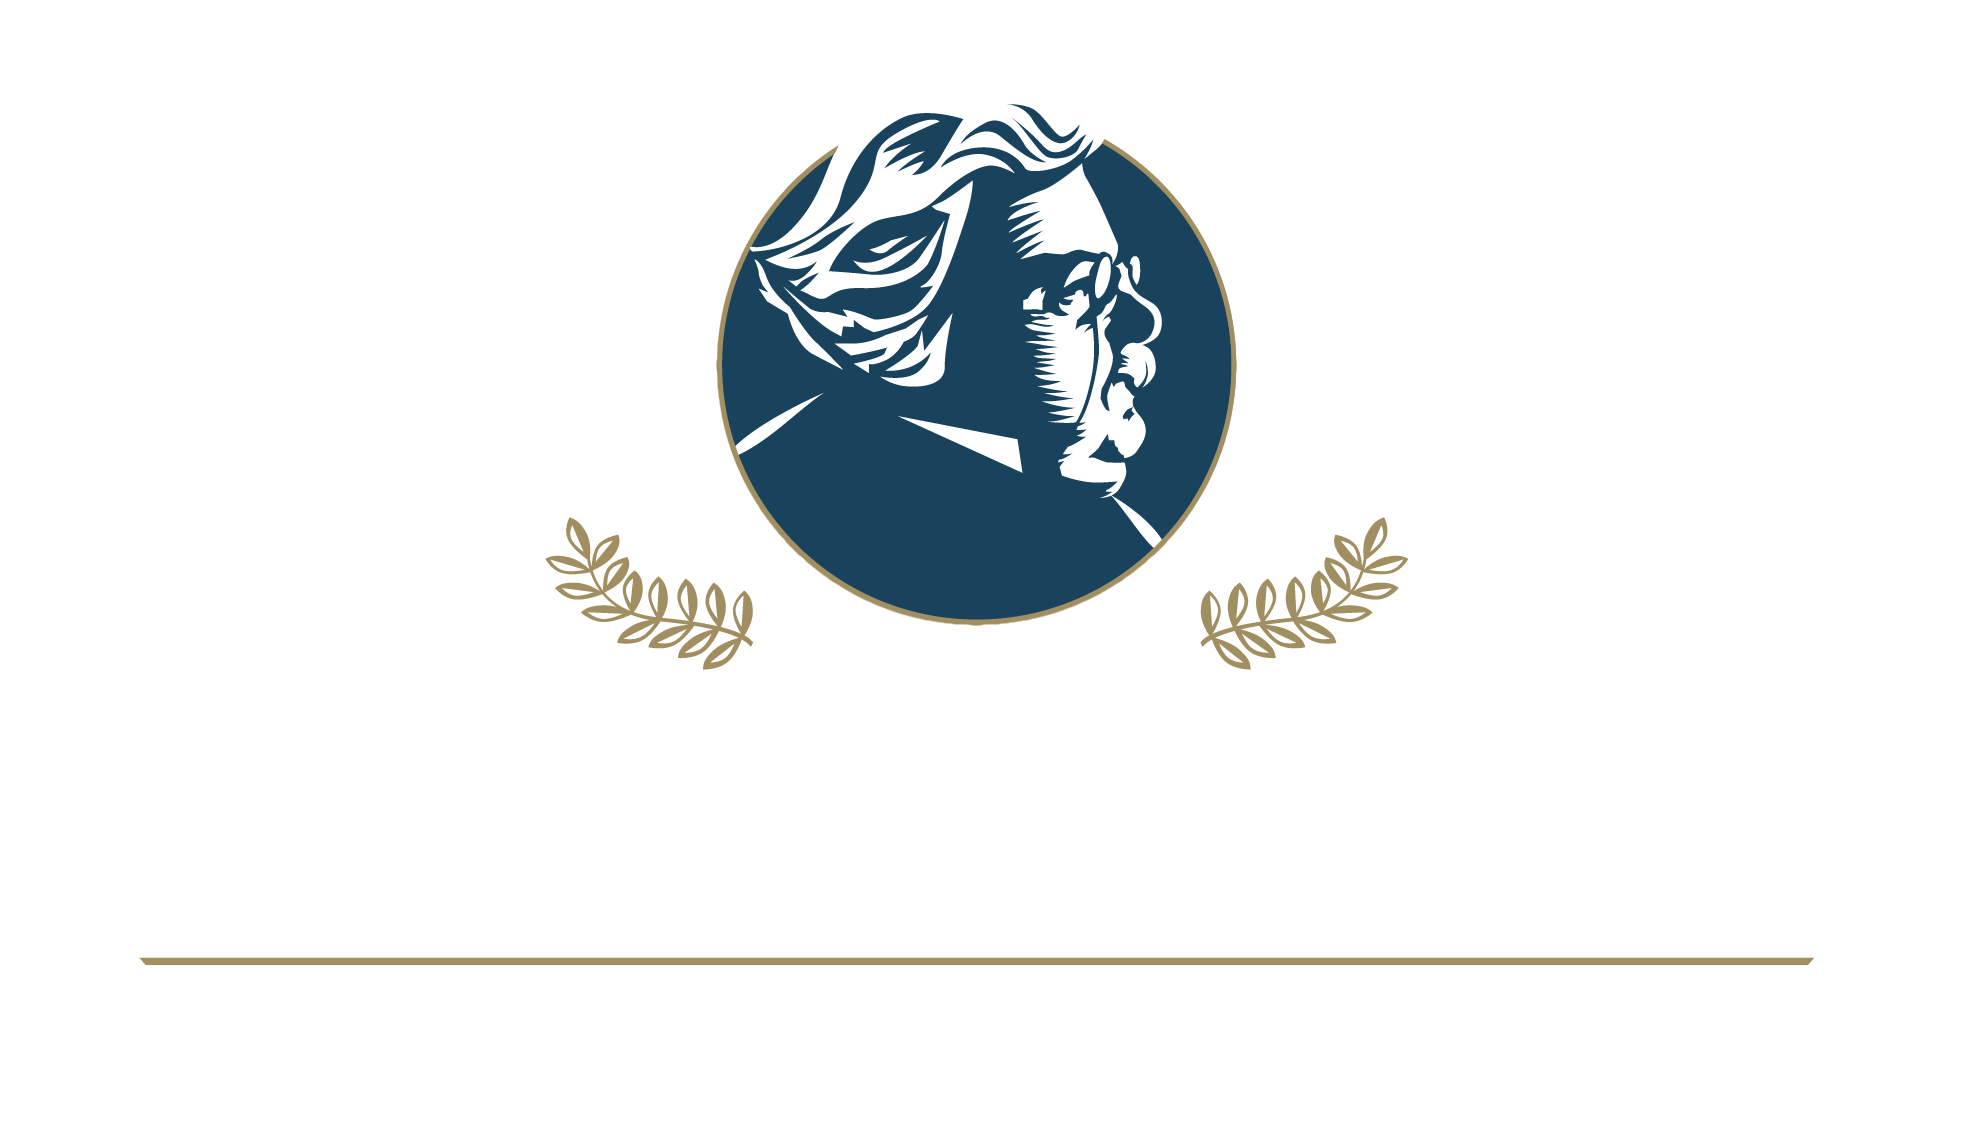 Chesterton Academy of St. Louis